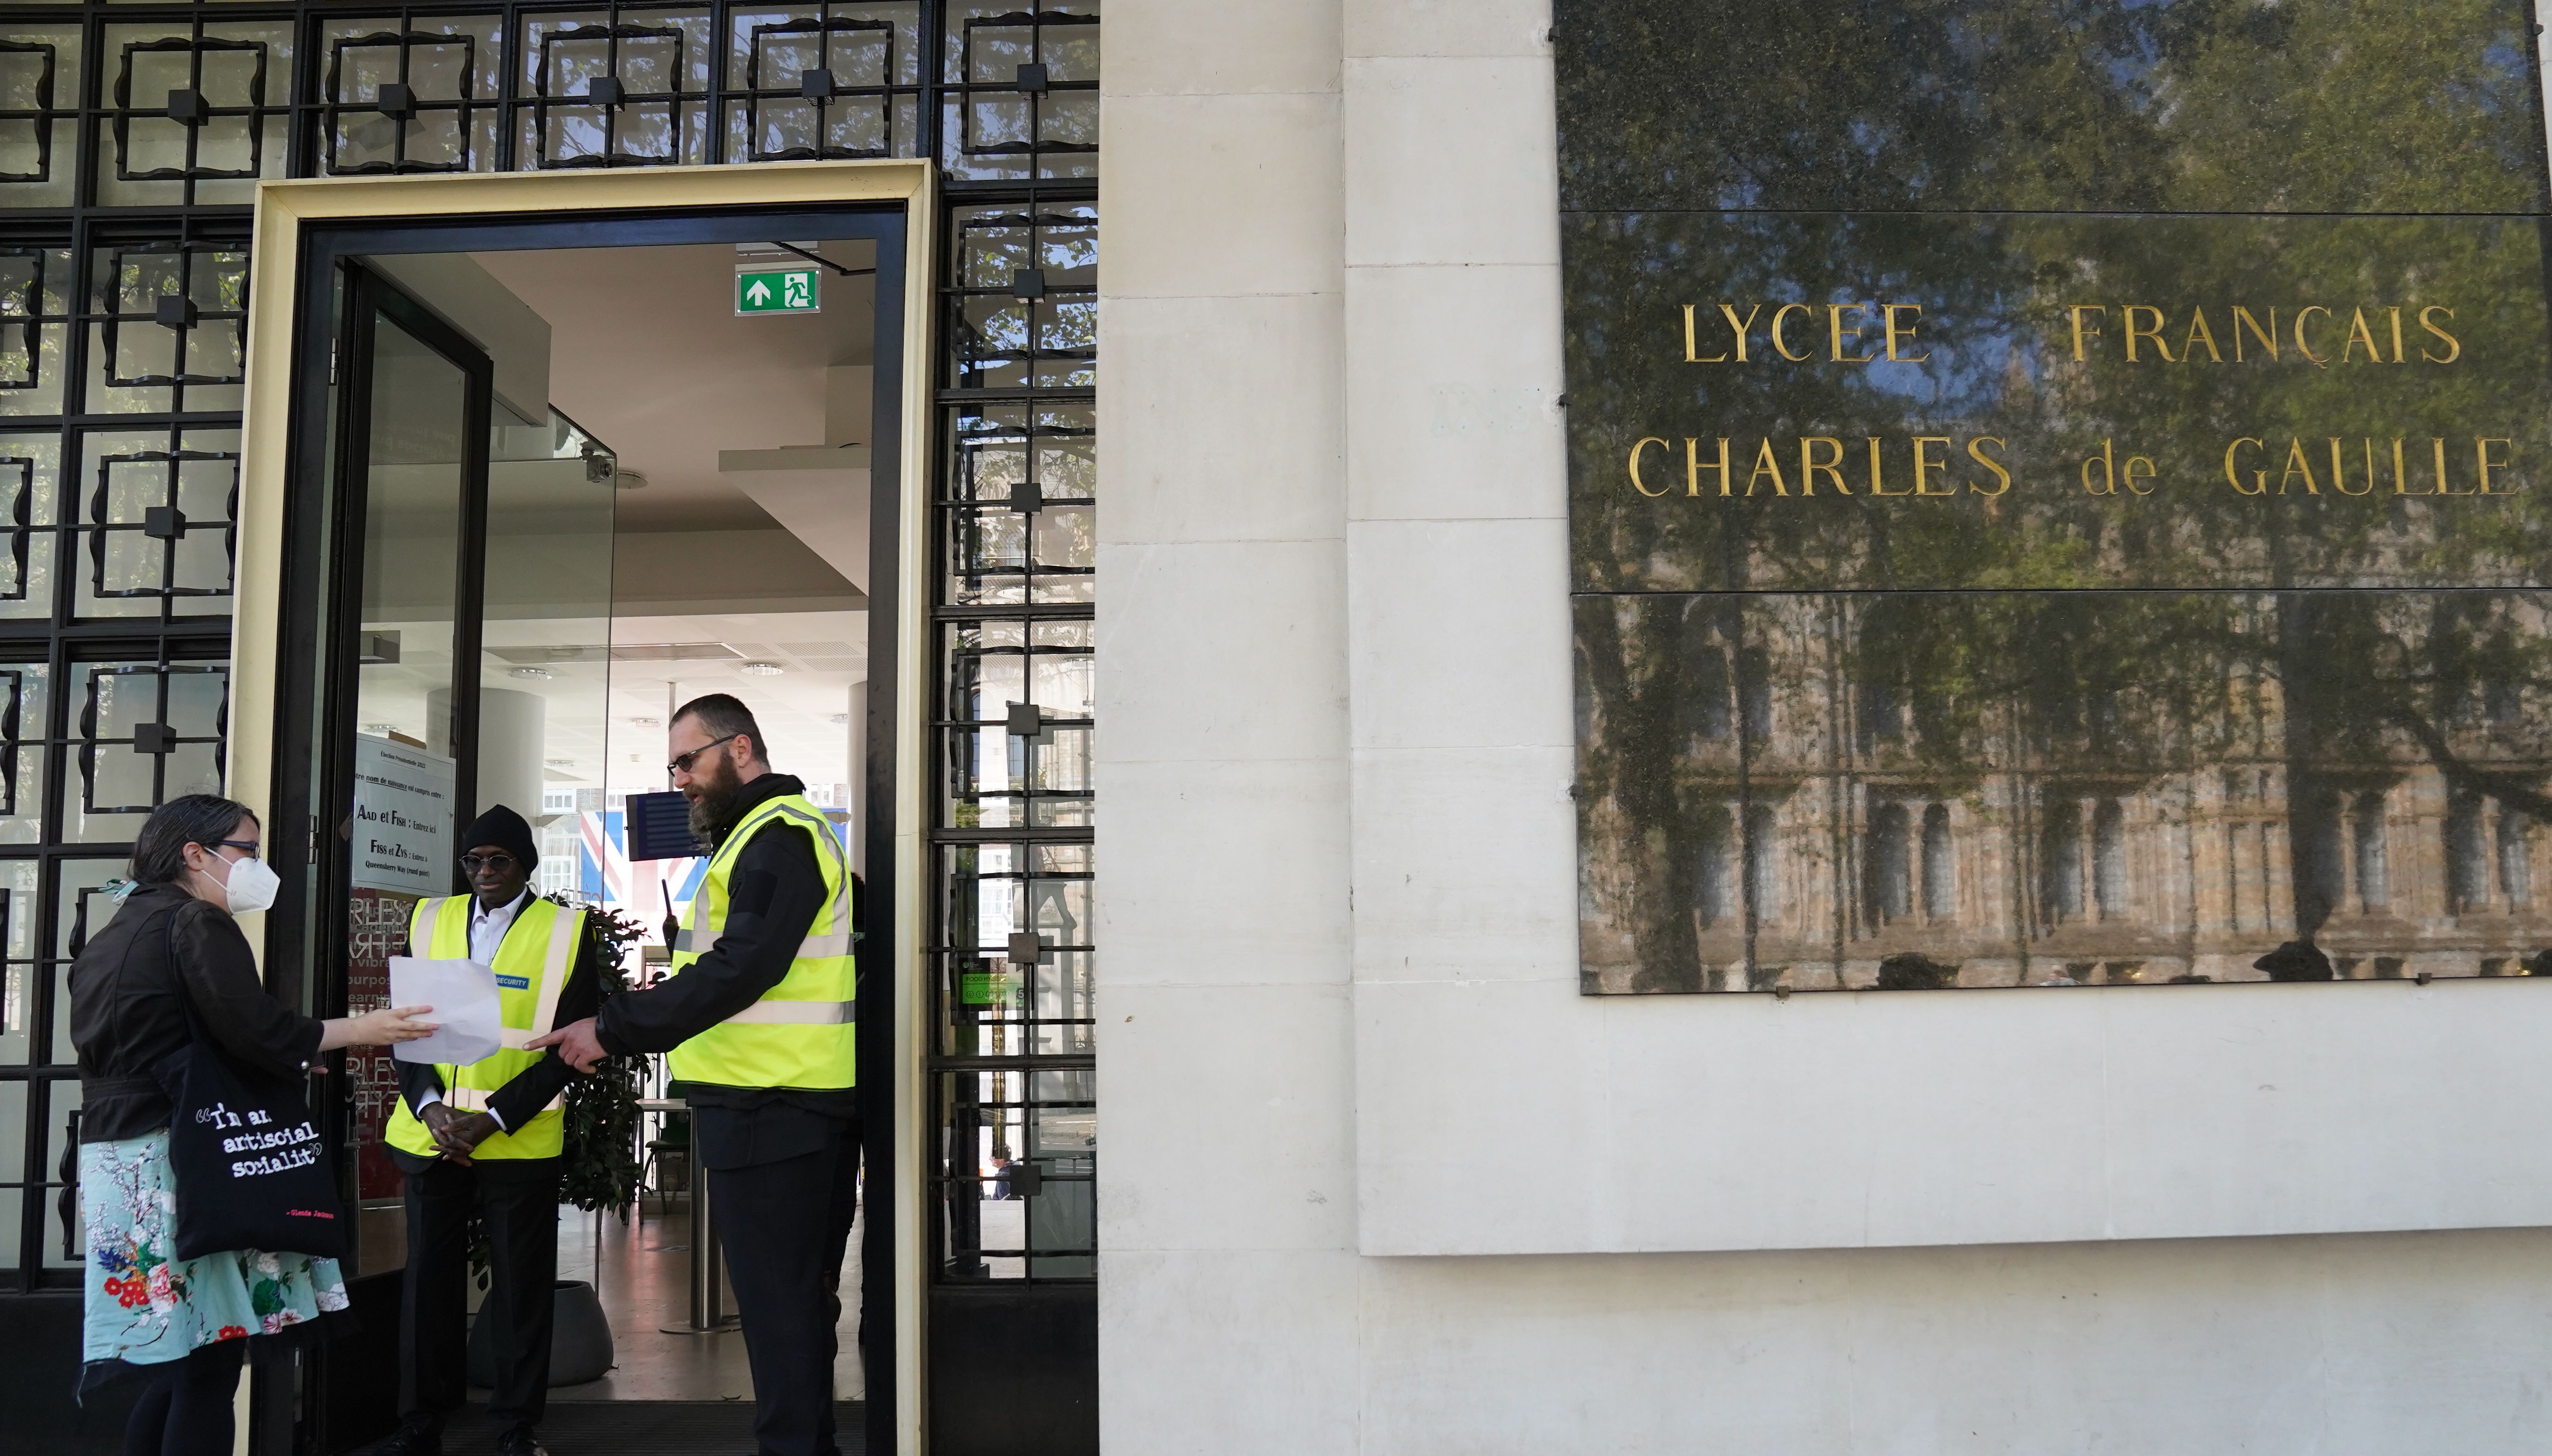 French nationals arrive to vote at Lycee Francais Charles de Gaulle in London, for the French presidential election between Emmanuel Macron and Marine Le Pen. Picture date: Sunday April 24, 2022.